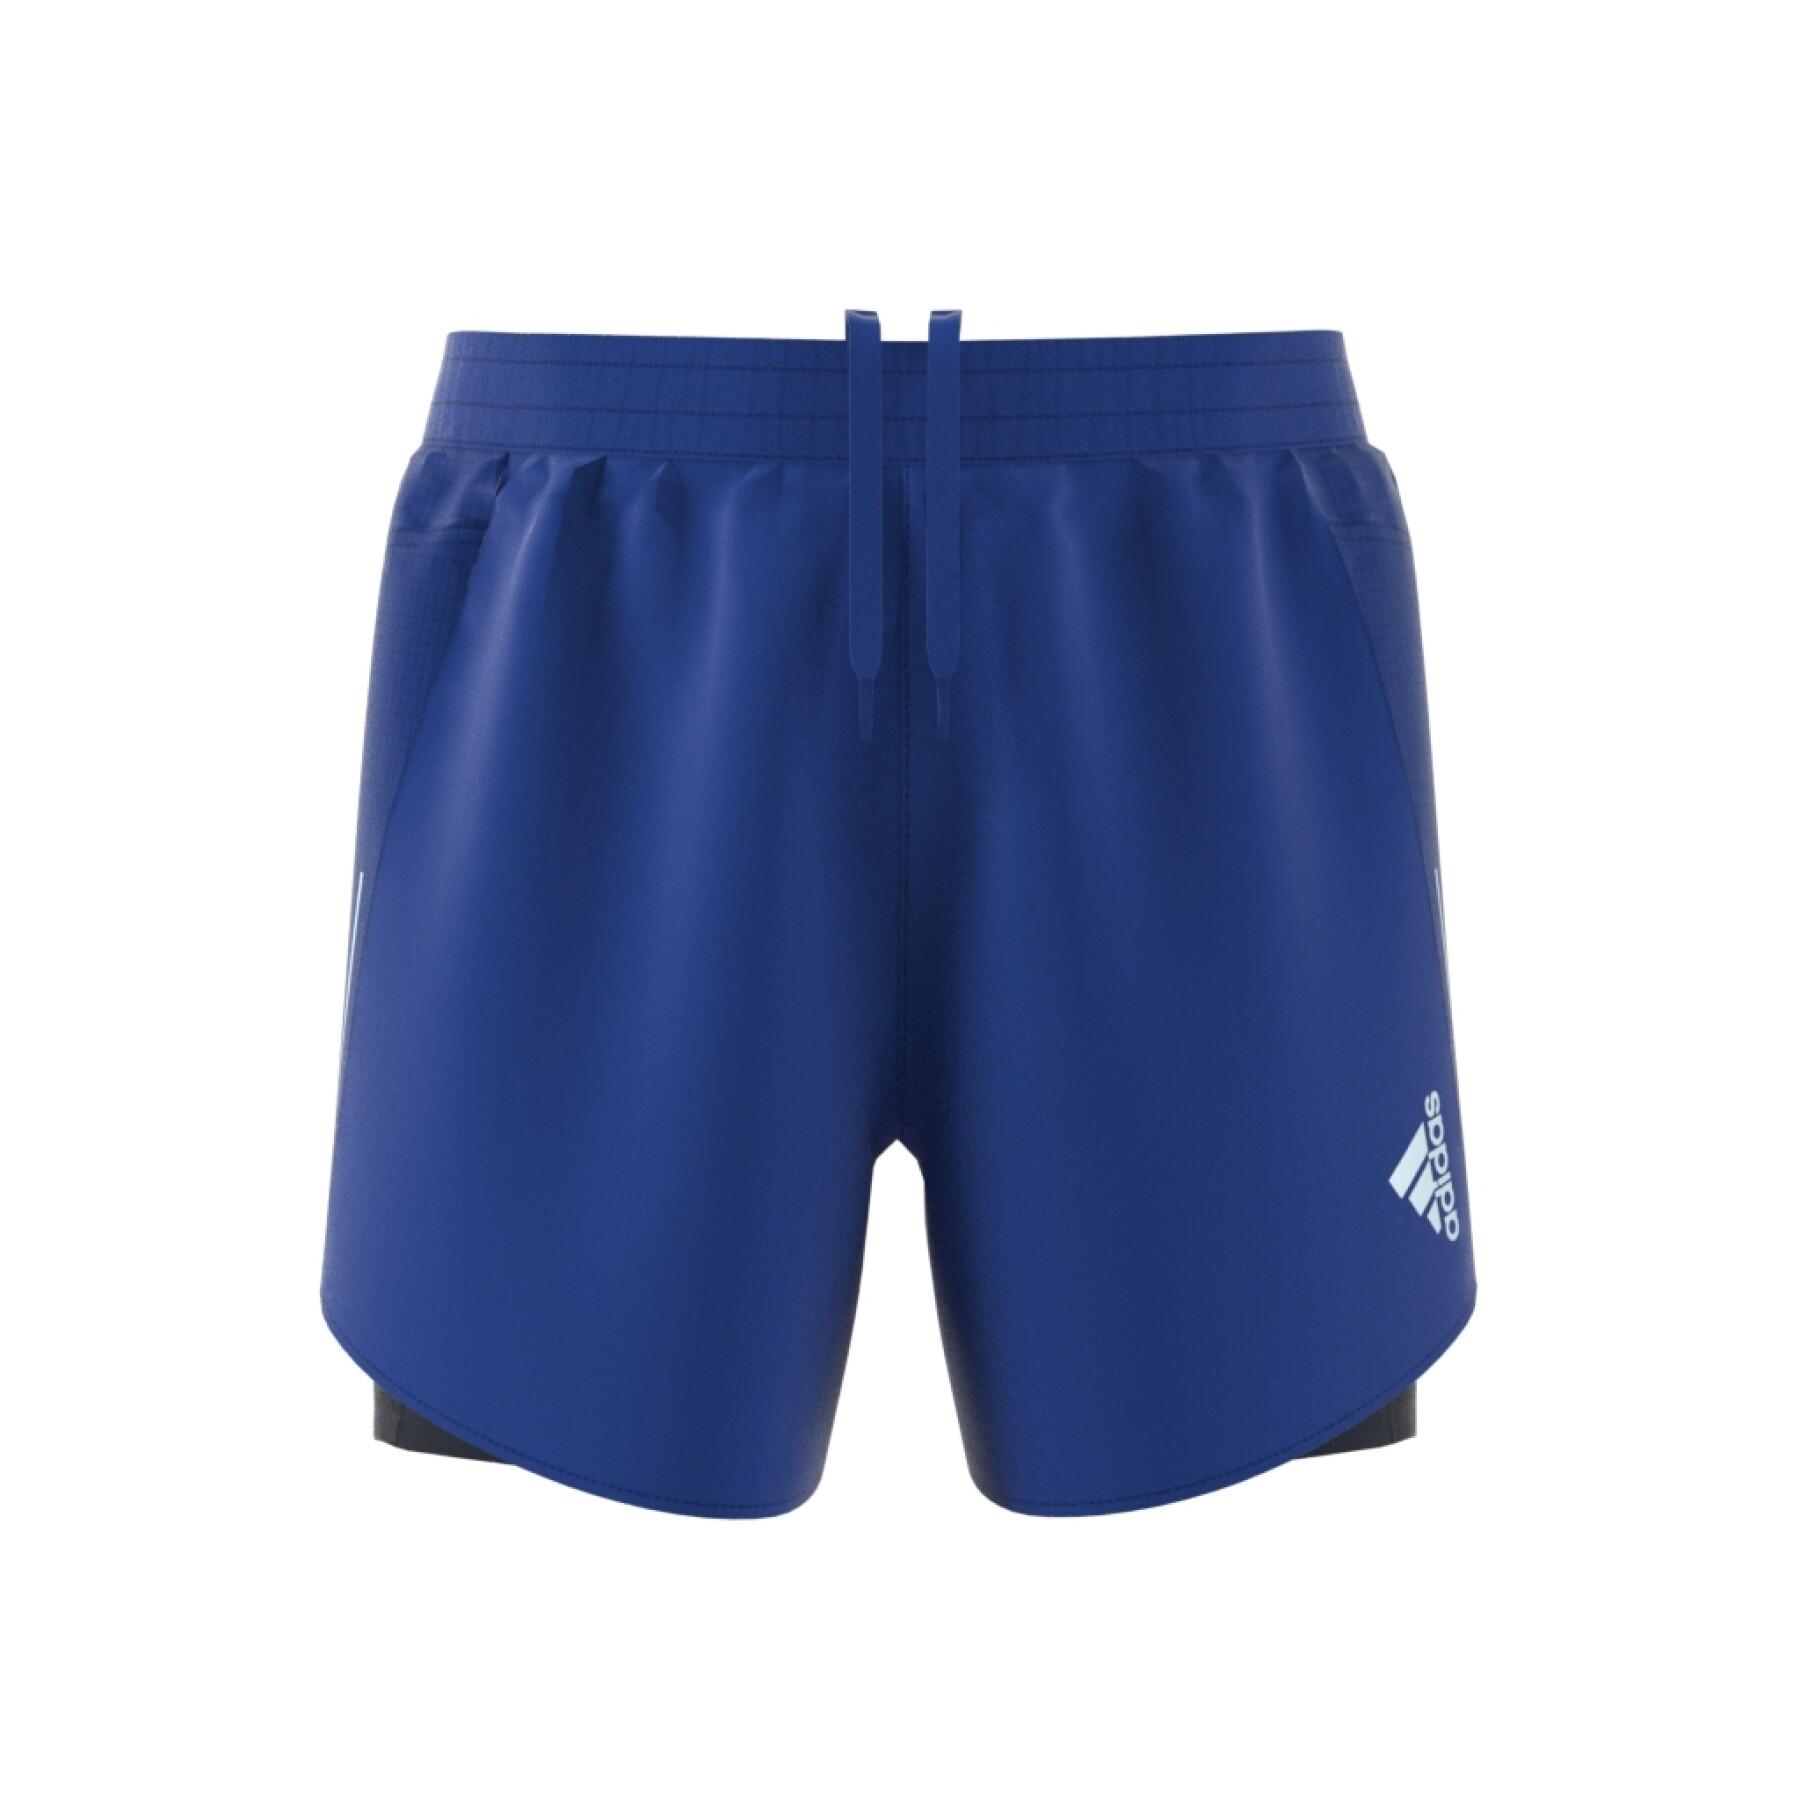 Two in one shorts designed for running adidas